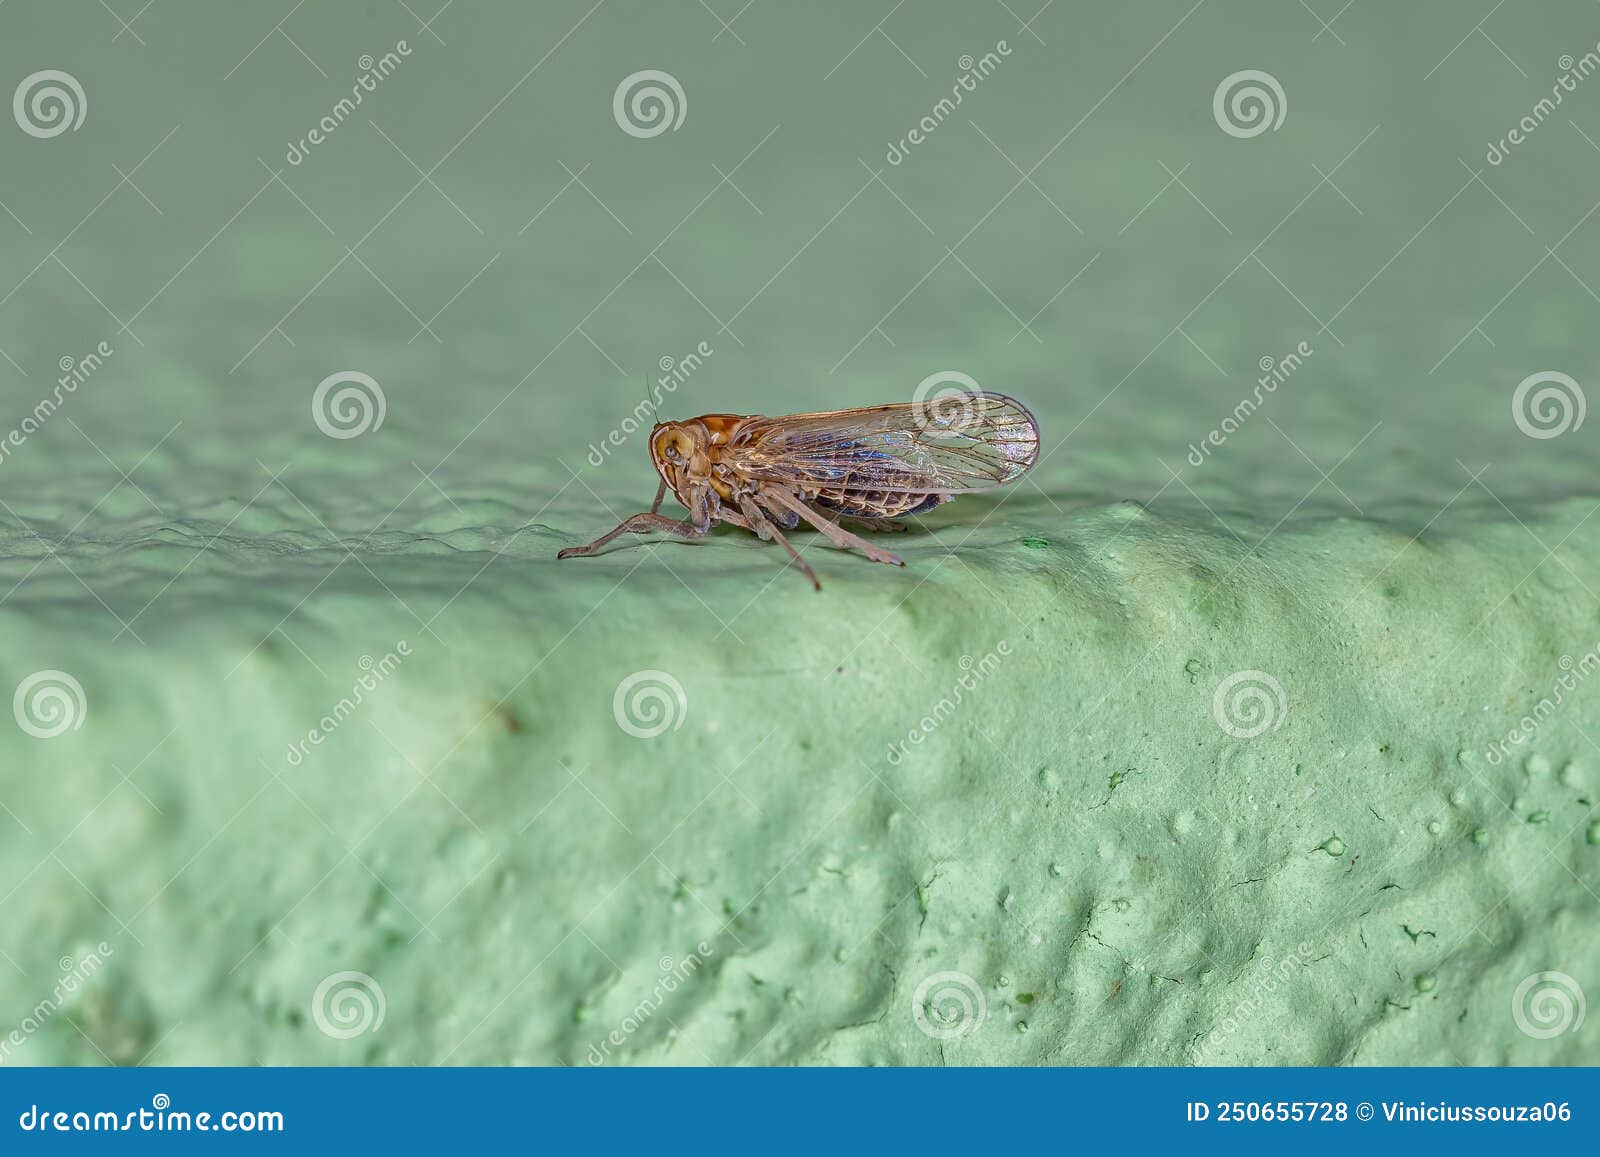 adult delphacid planthopper insect